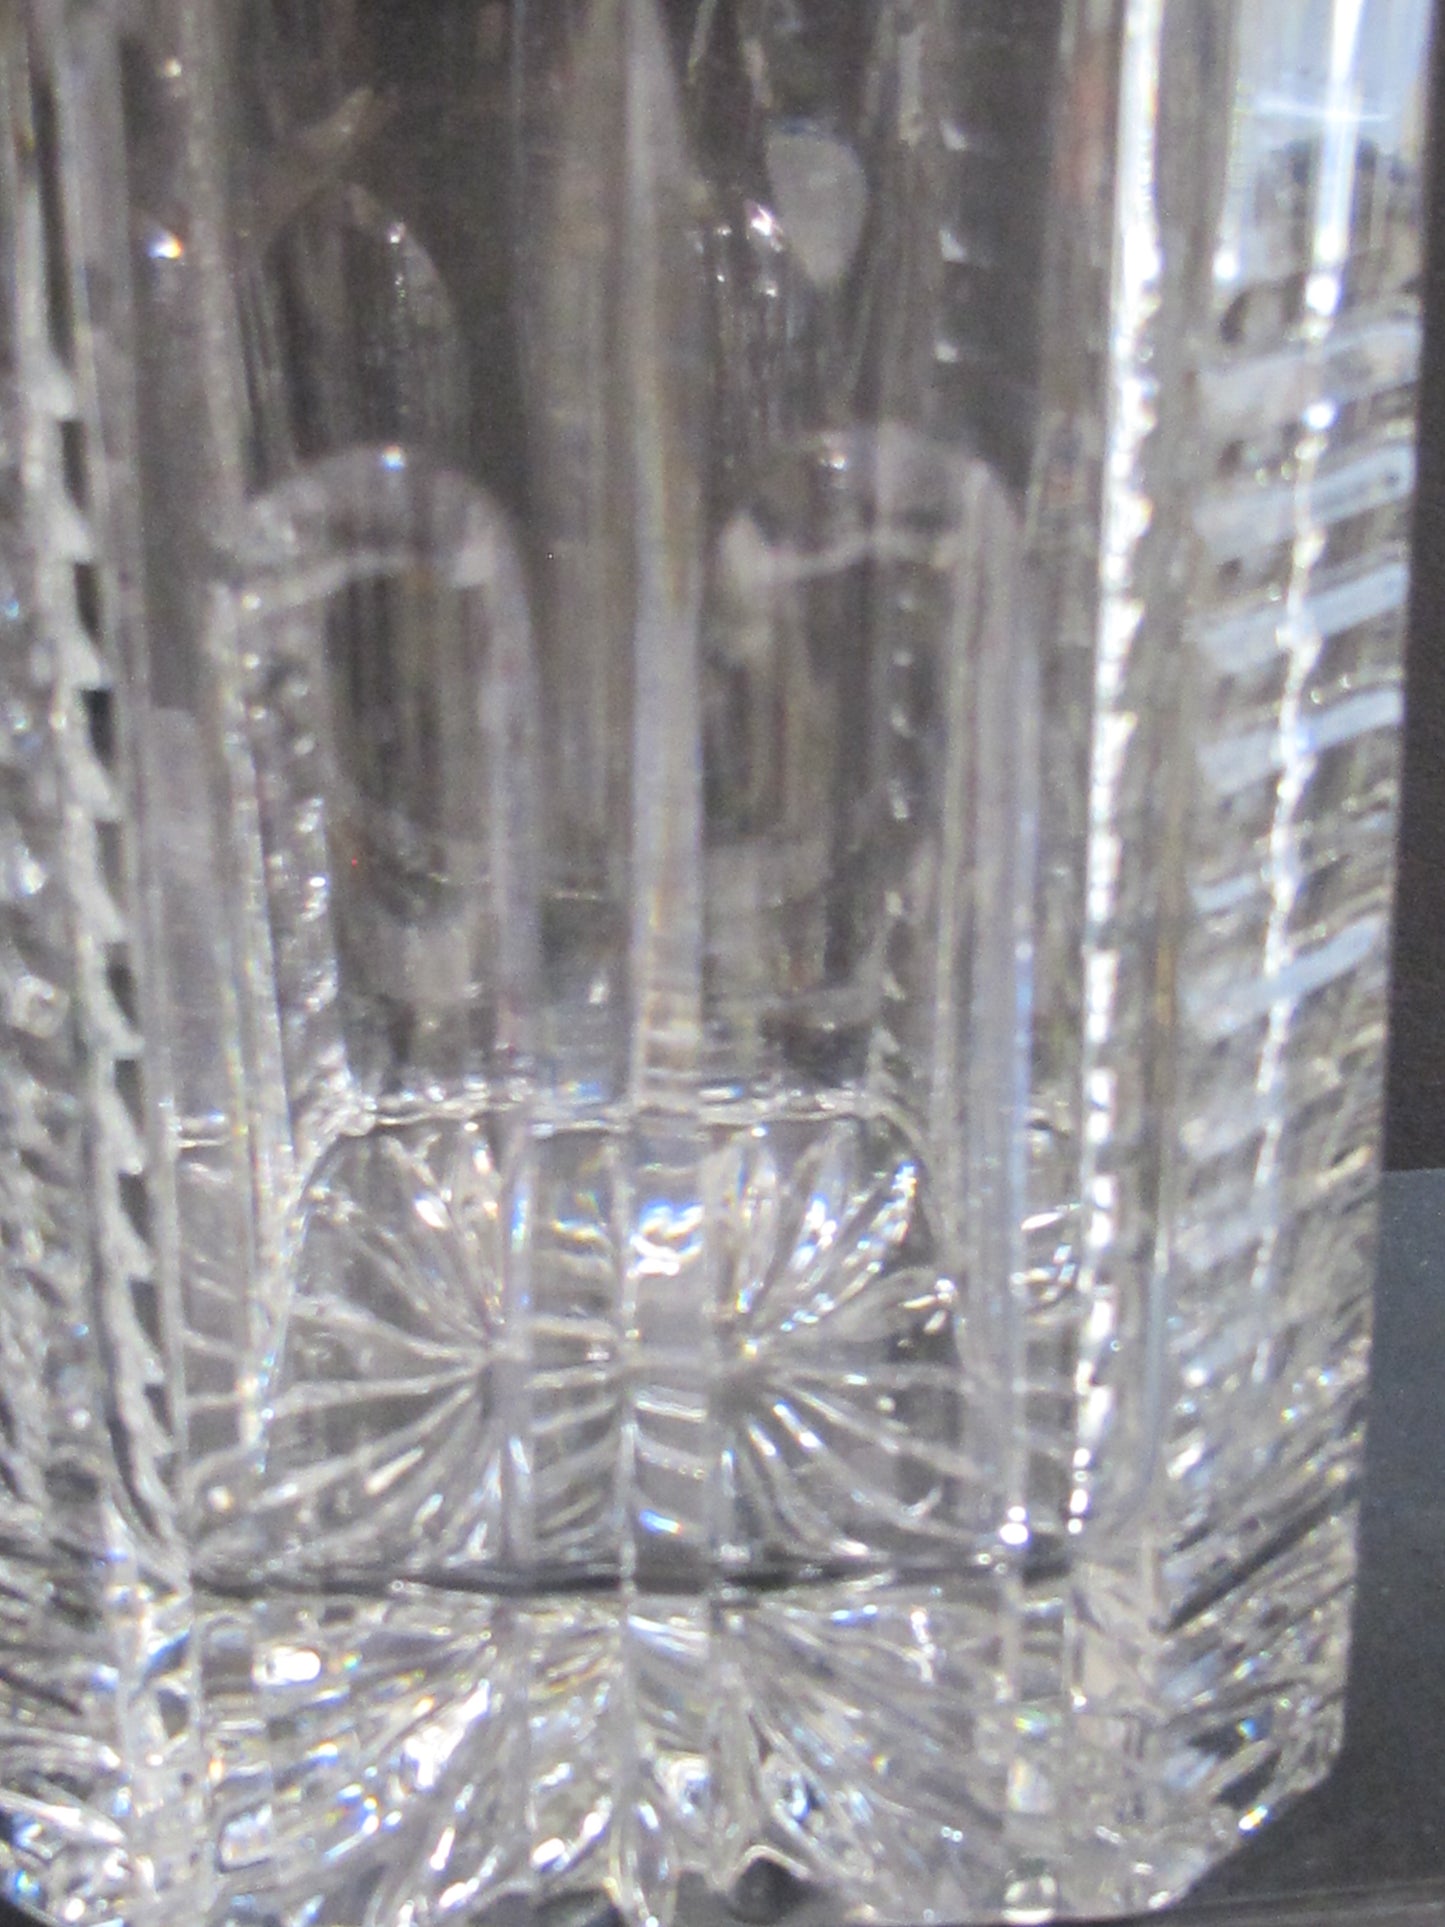 ORourke hand Cut glass square Crystal decanter